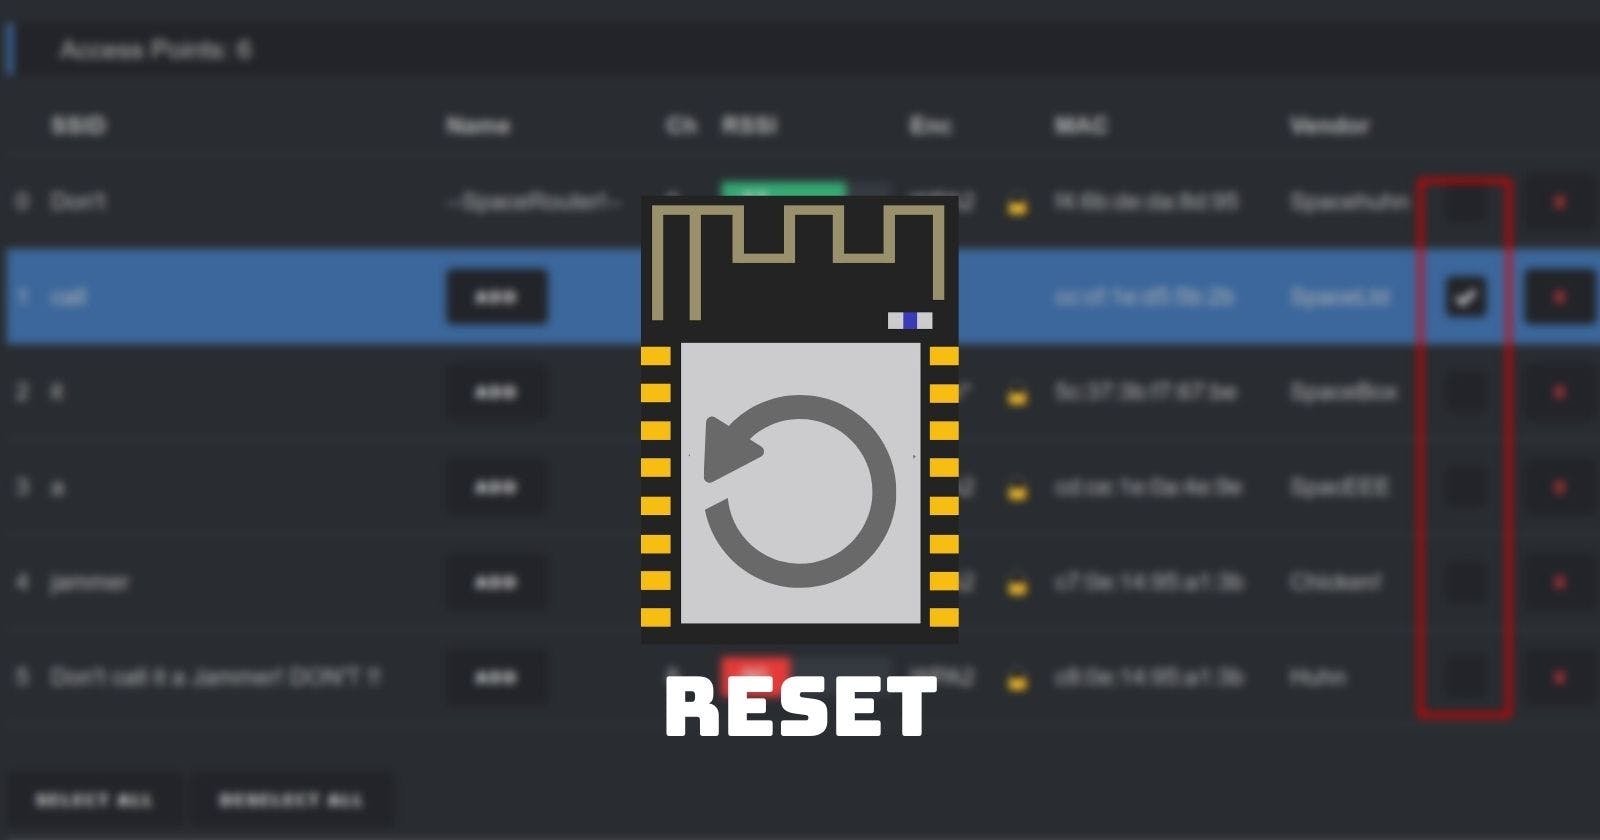 How to reset ESP8266 Deauther